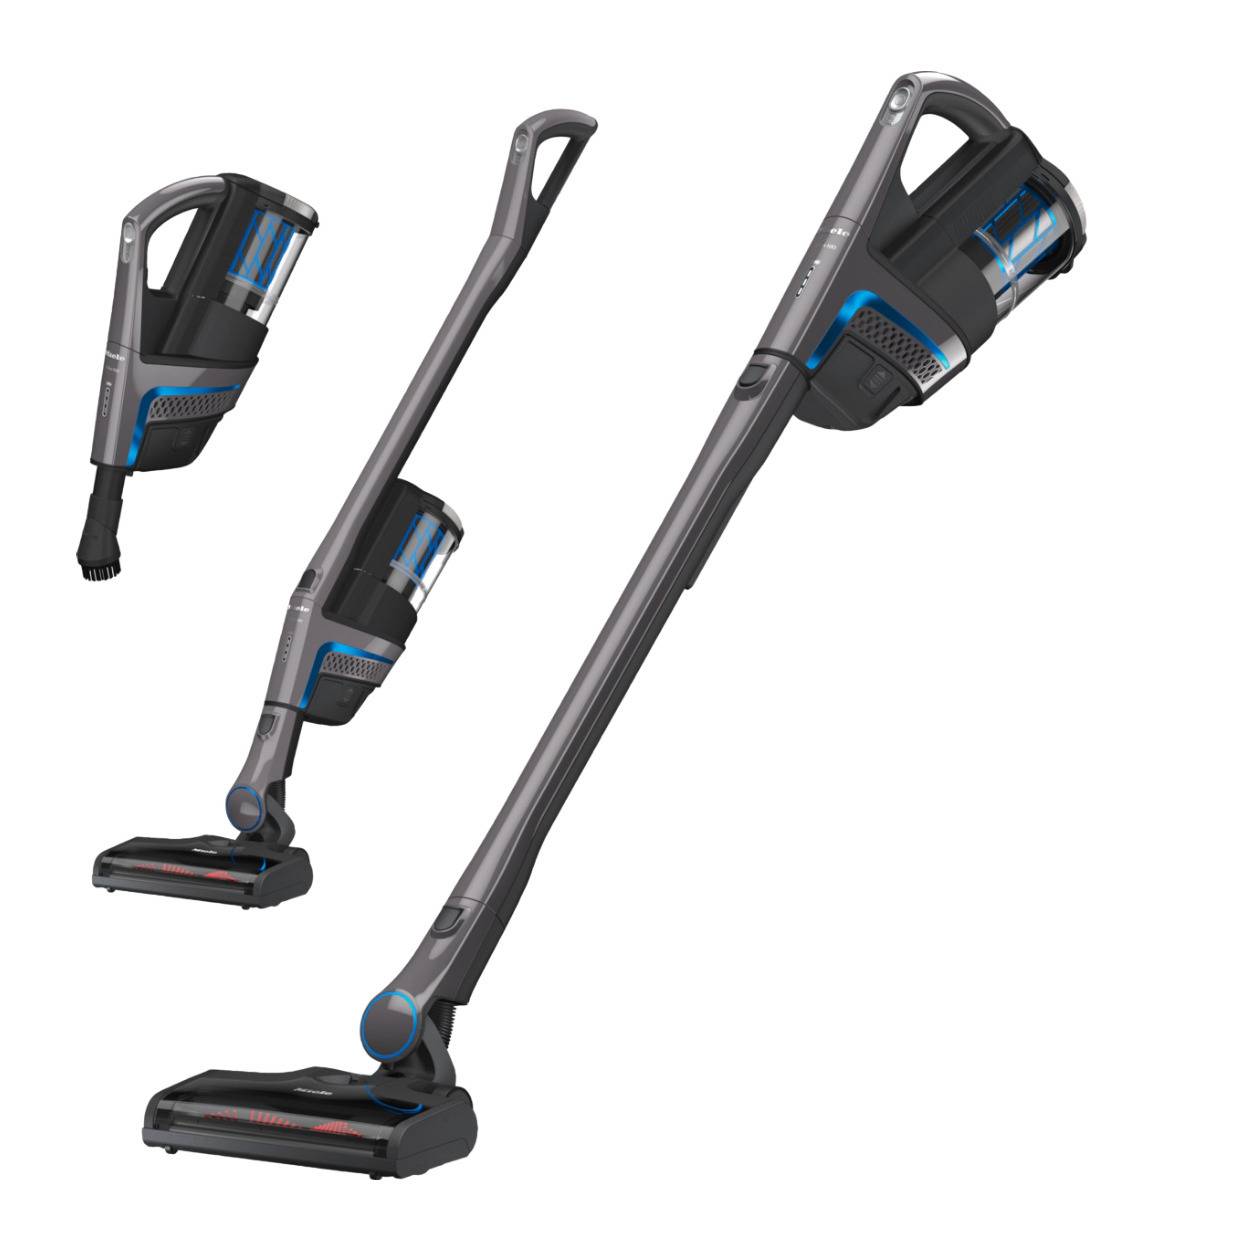 Miele Triflex HX1 Cordless Stick Vacuum Cleaner with Patented 3-In-1 Design (Graphite Gray)